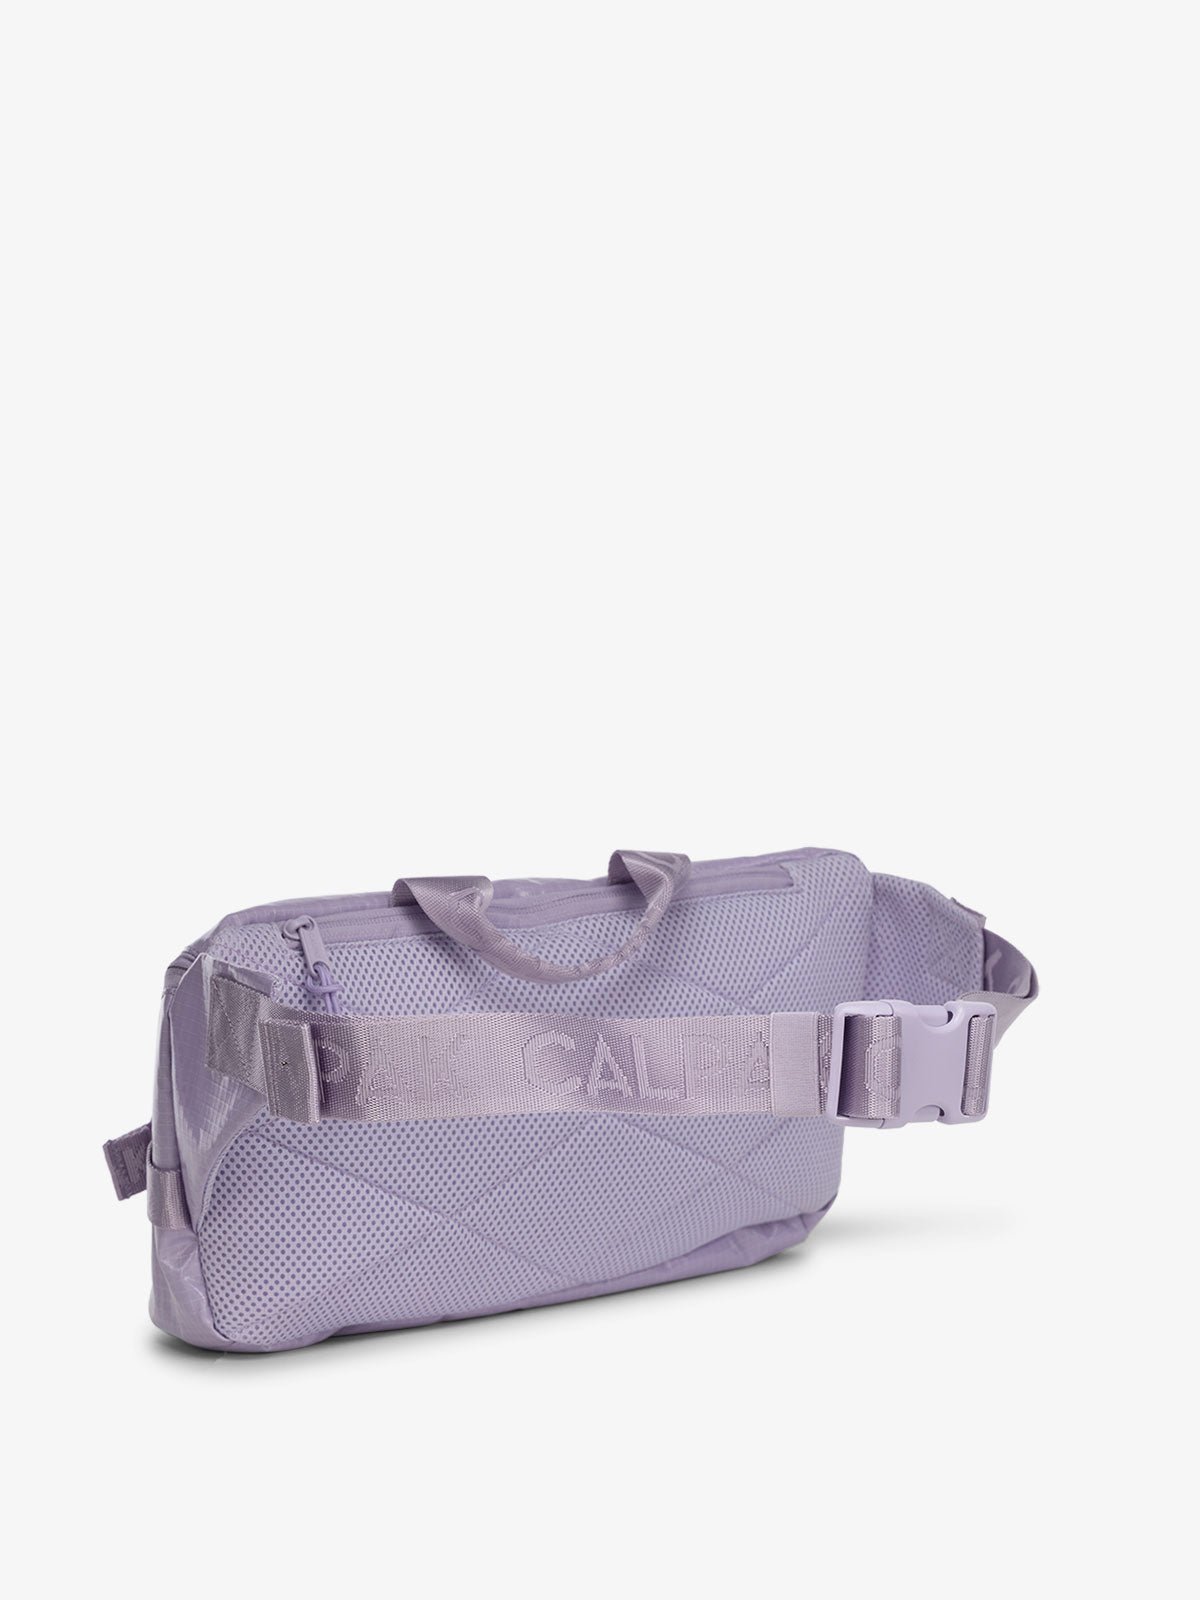 CALPAK Terra Sling Bag for women with adjustable crossbody strap and top handle in amethyst